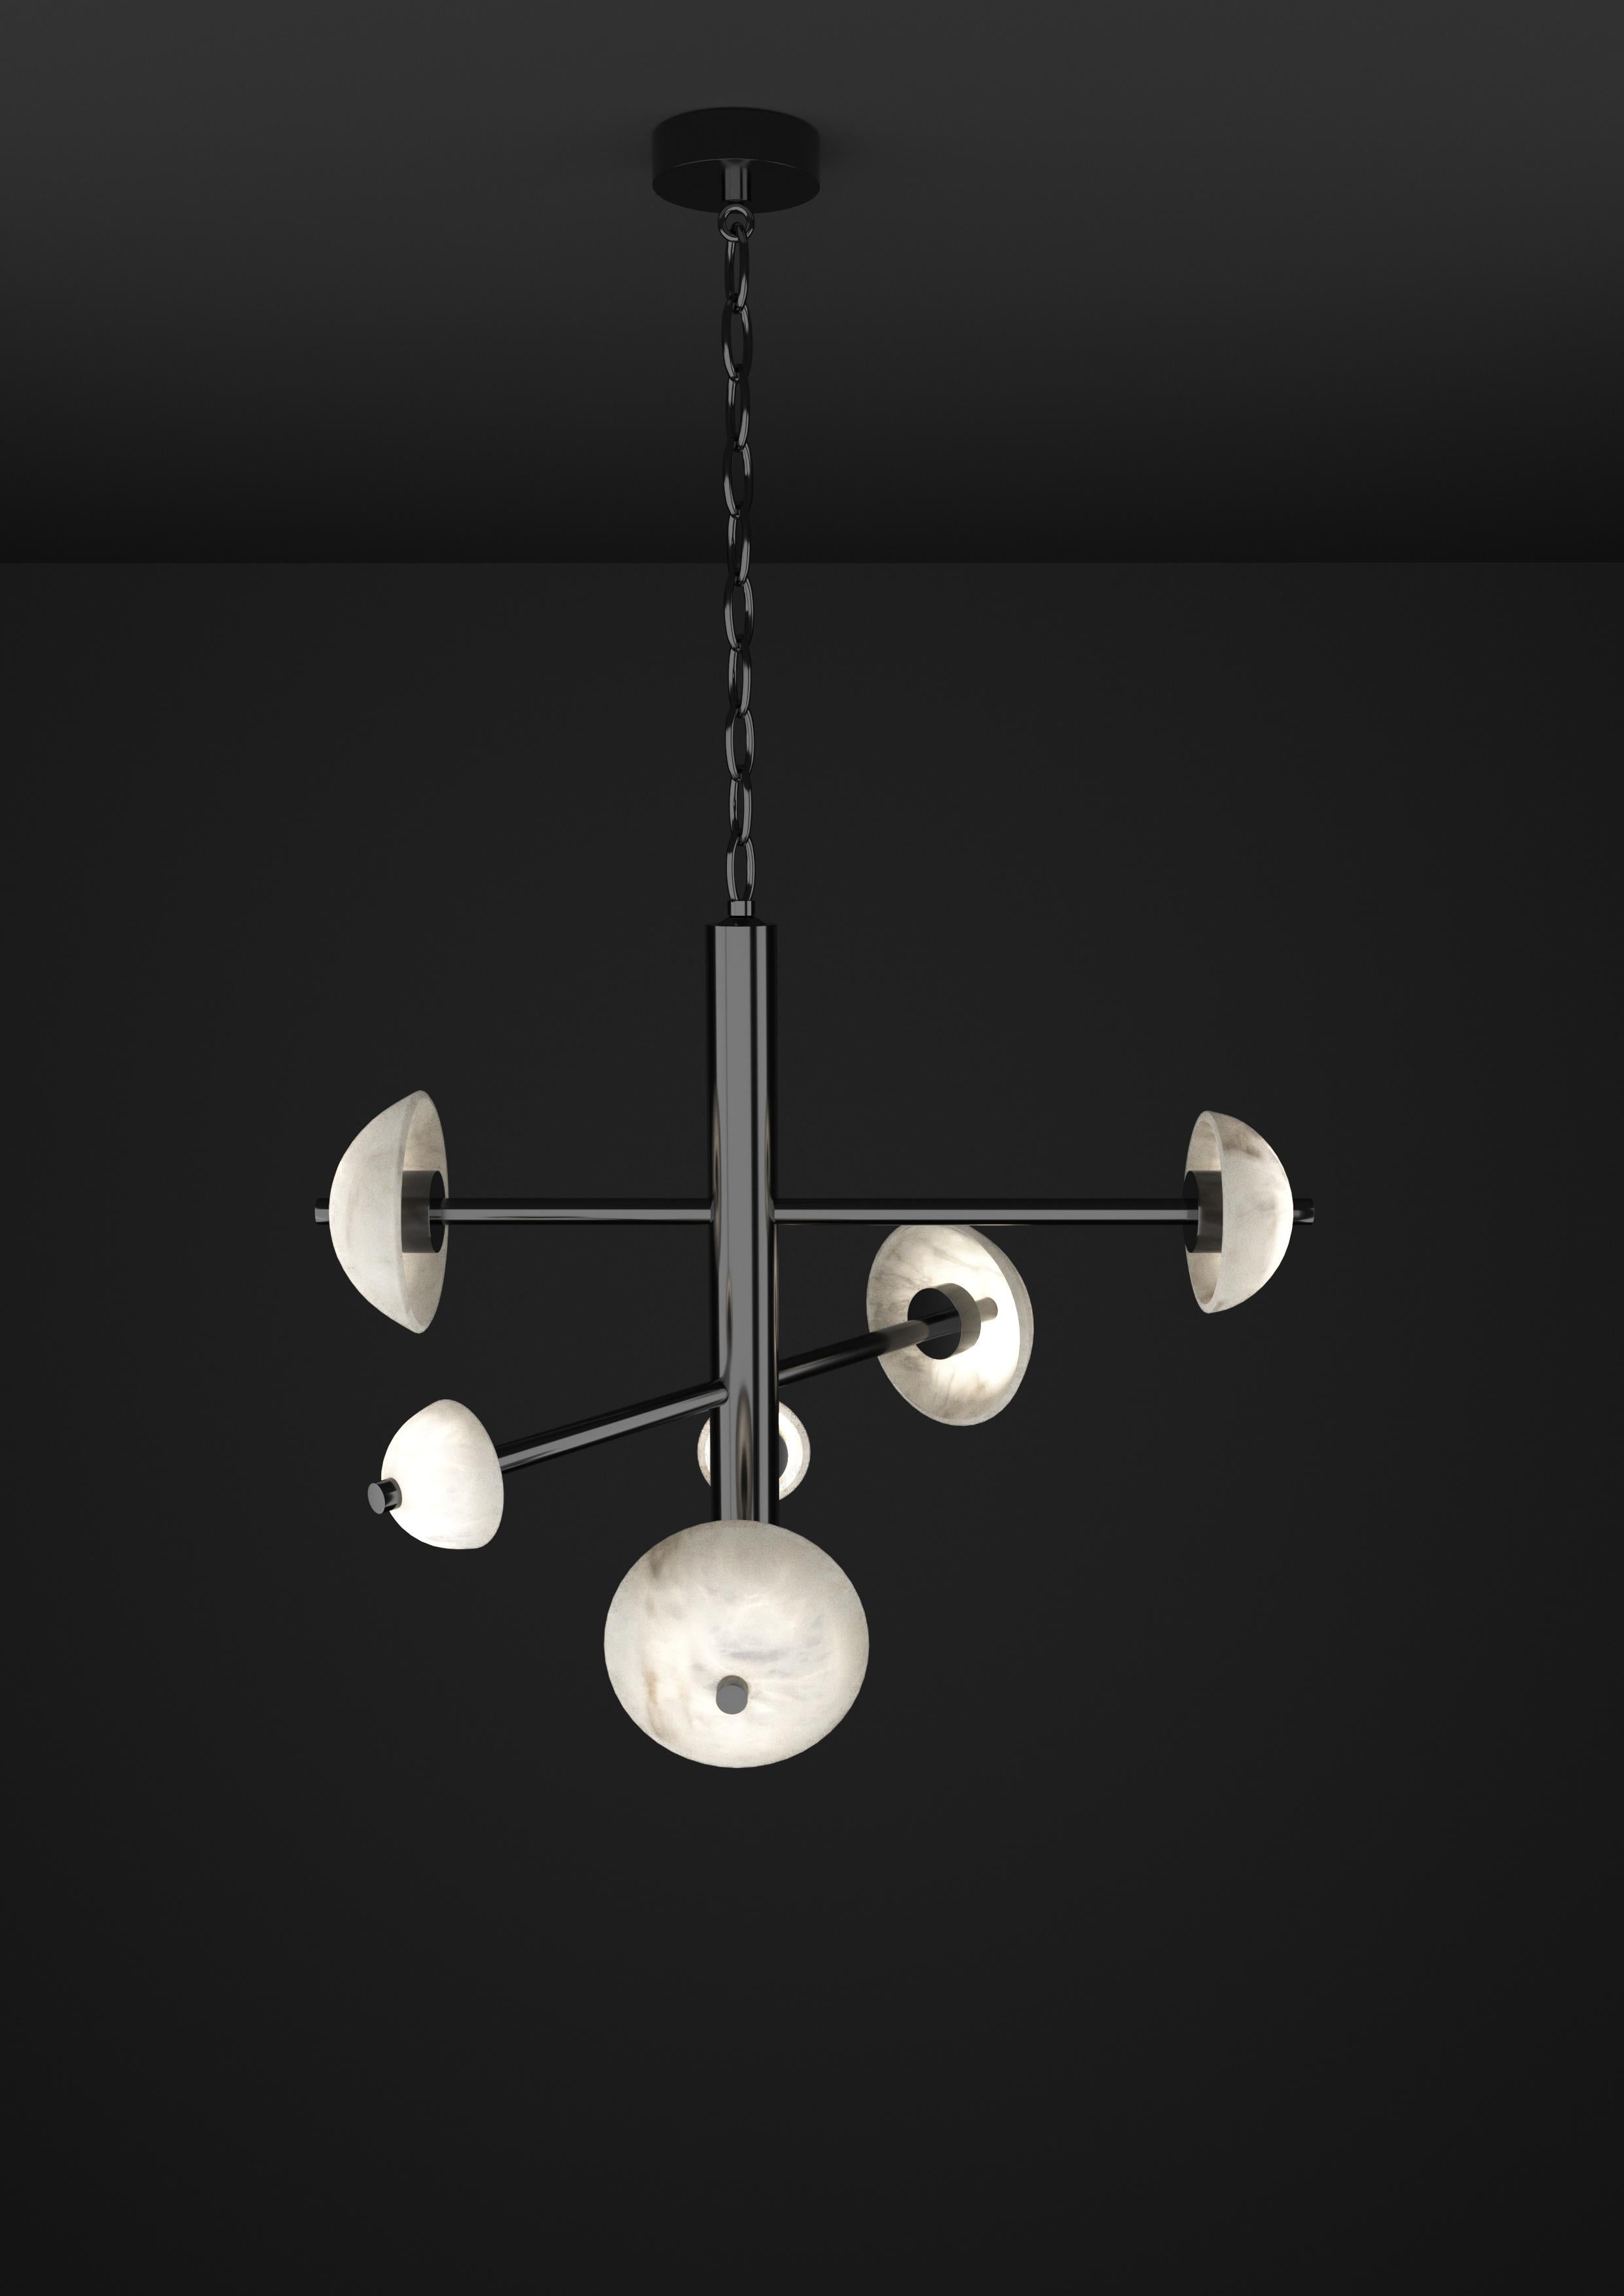 Apollo Shiny Black Metal Pendant Lamp by Alabastro Italiano
Dimensions: D 70,5 x W 54 x H 64 cm.
Materials: White alabaster and metal.

Available in different finishes: Shiny Silver, Bronze, Brushed Brass, Ruggine of Florence, Brushed Burnished,